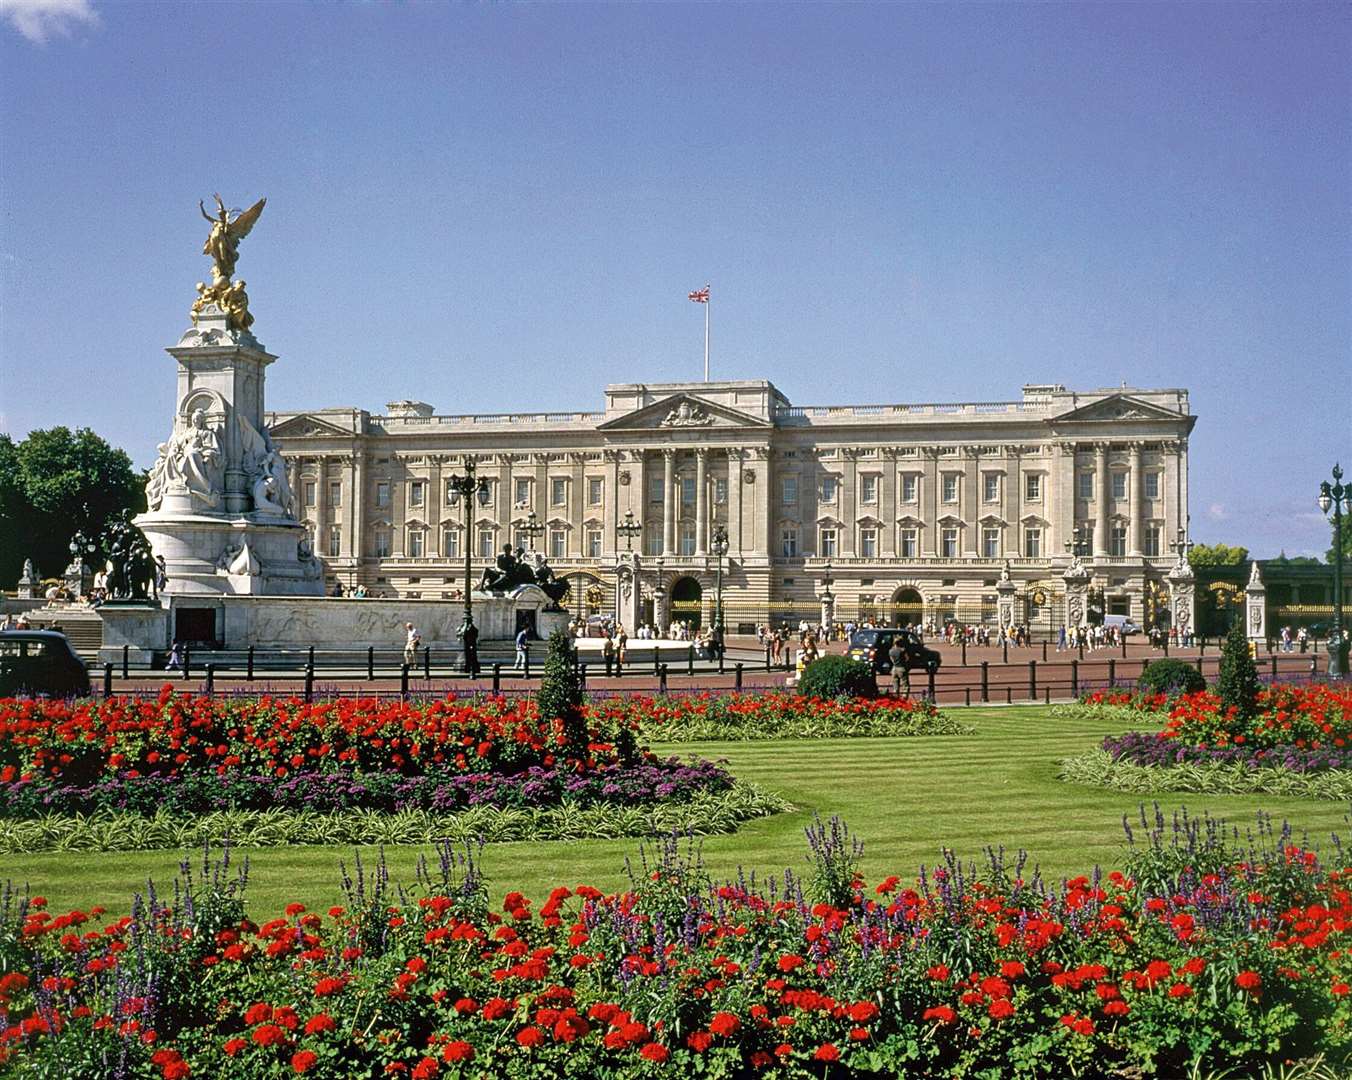 The event is taking place at Buckingham Palace